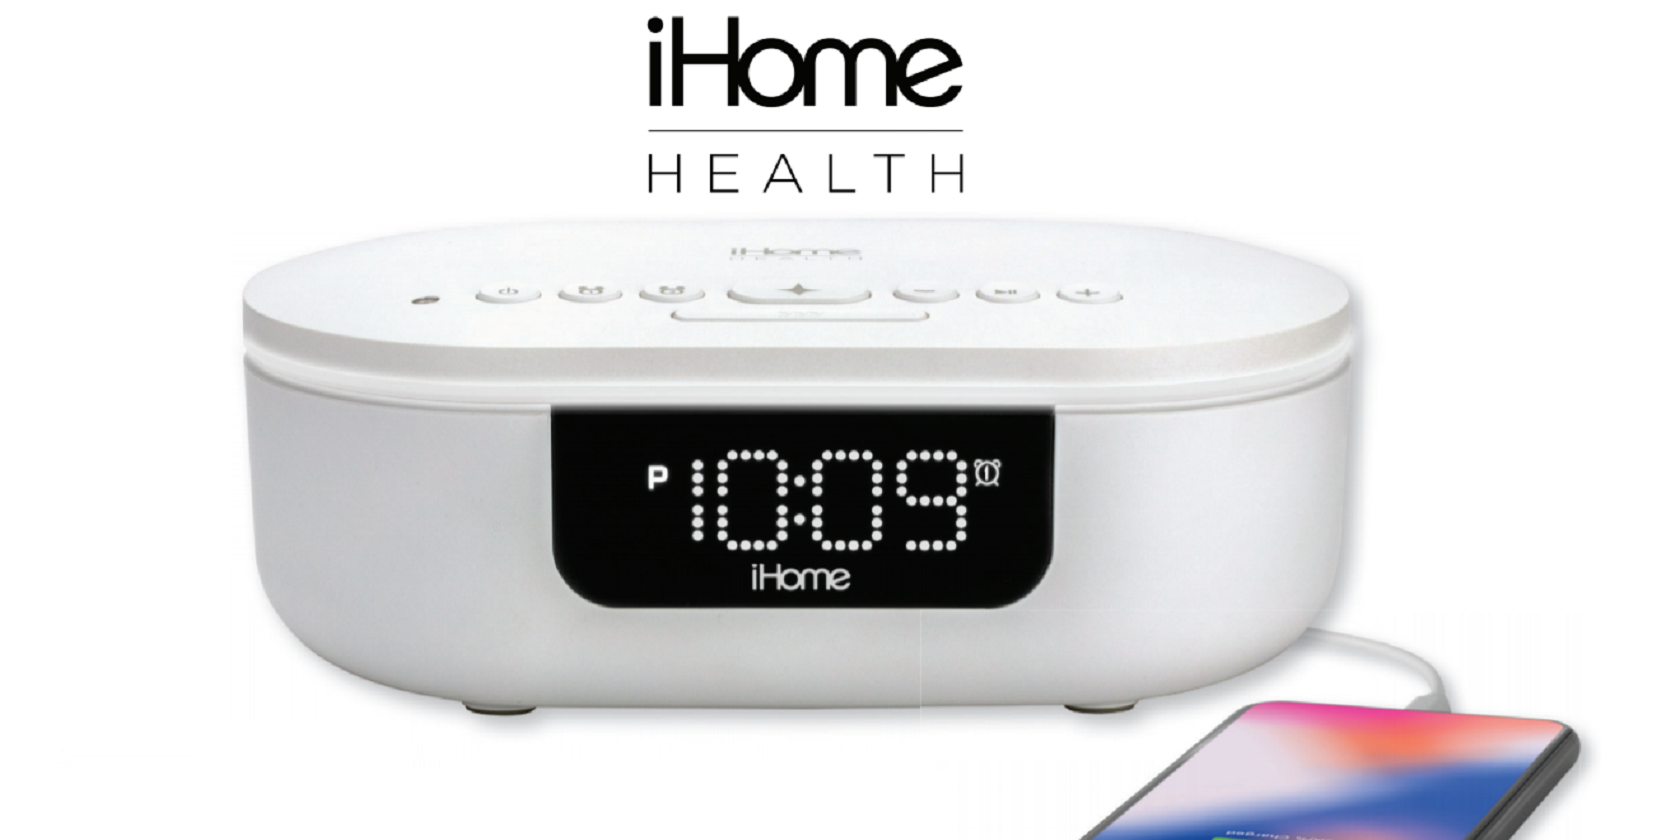 ihome ces 2021